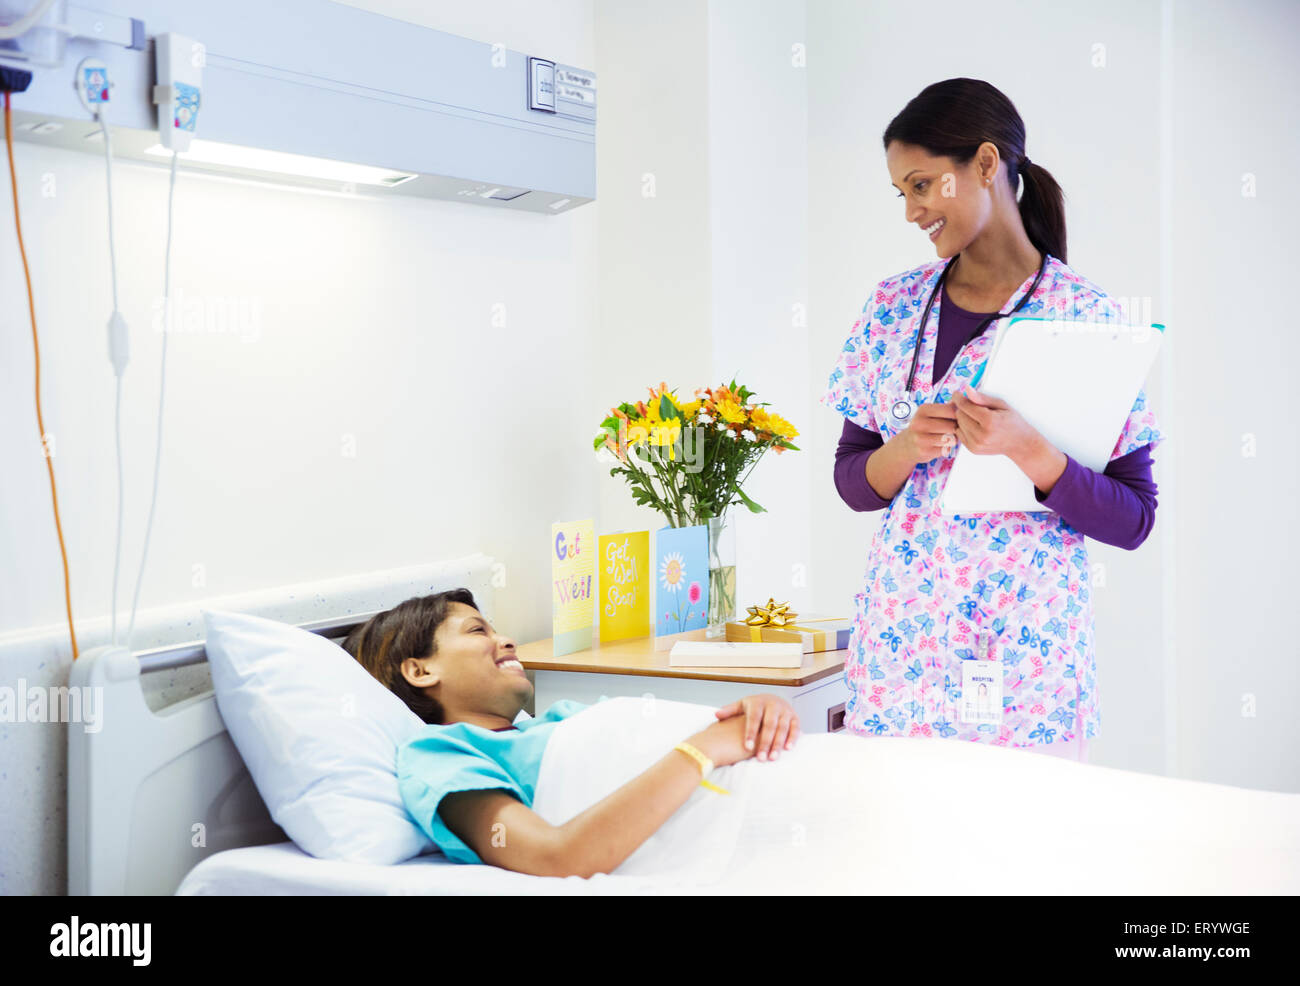 Nurse talking to patient in hospital room Banque D'Images